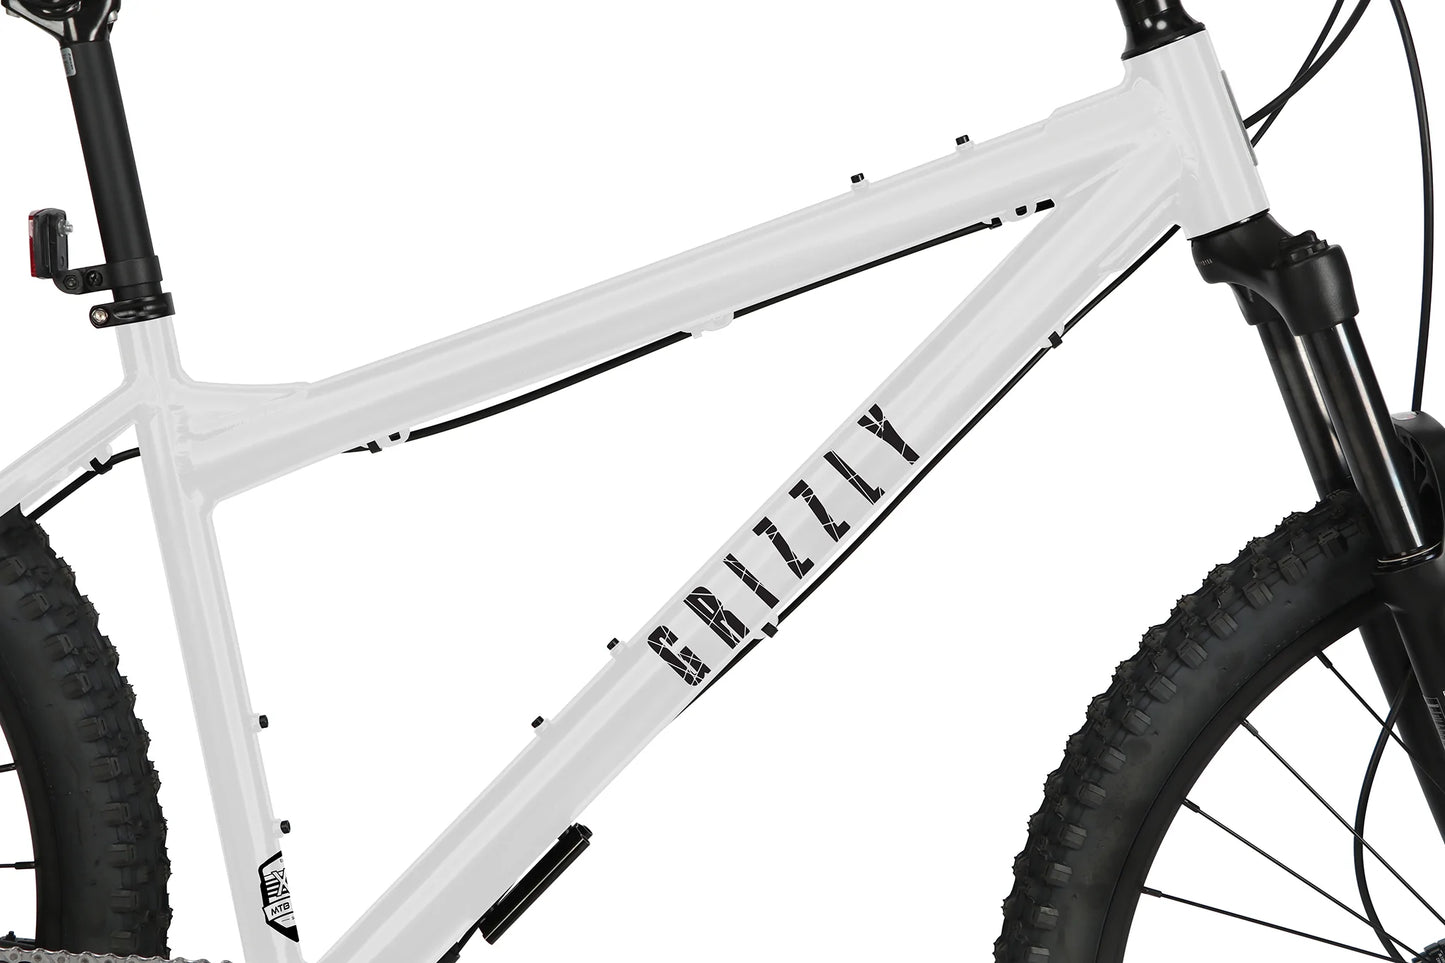 Golden Cycles - Grizzly MTB 29"- White